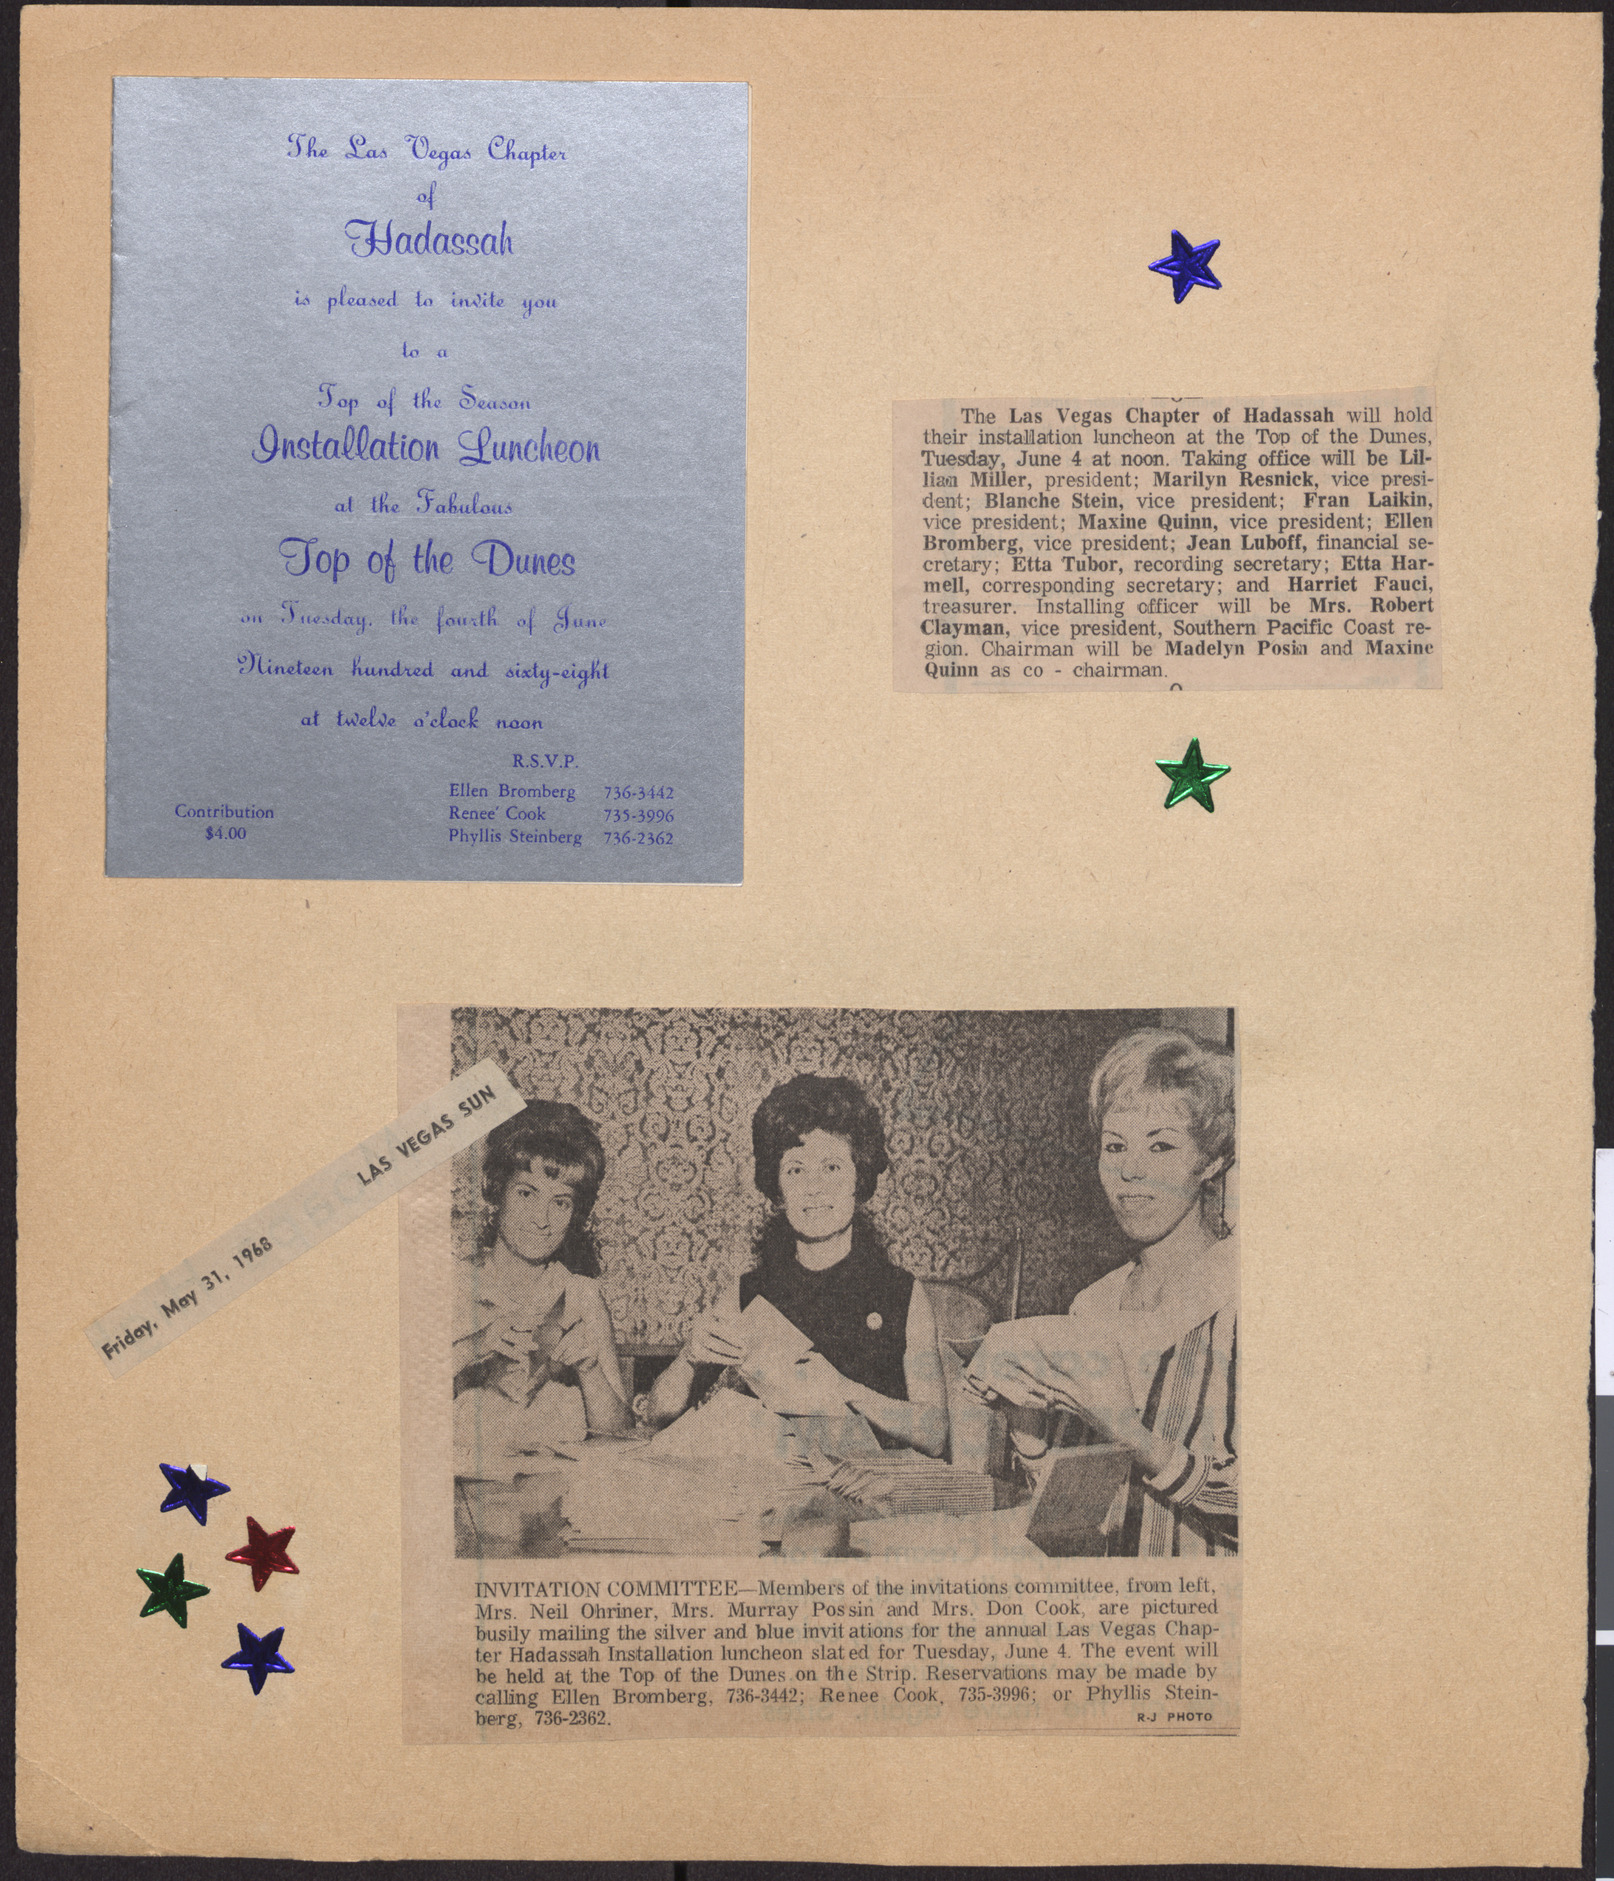 Invitations and newspaper clippings about the Hadassah installation luncheon, May/June 1968 to the Hadassah Installation Luncheon, June 4, 1968